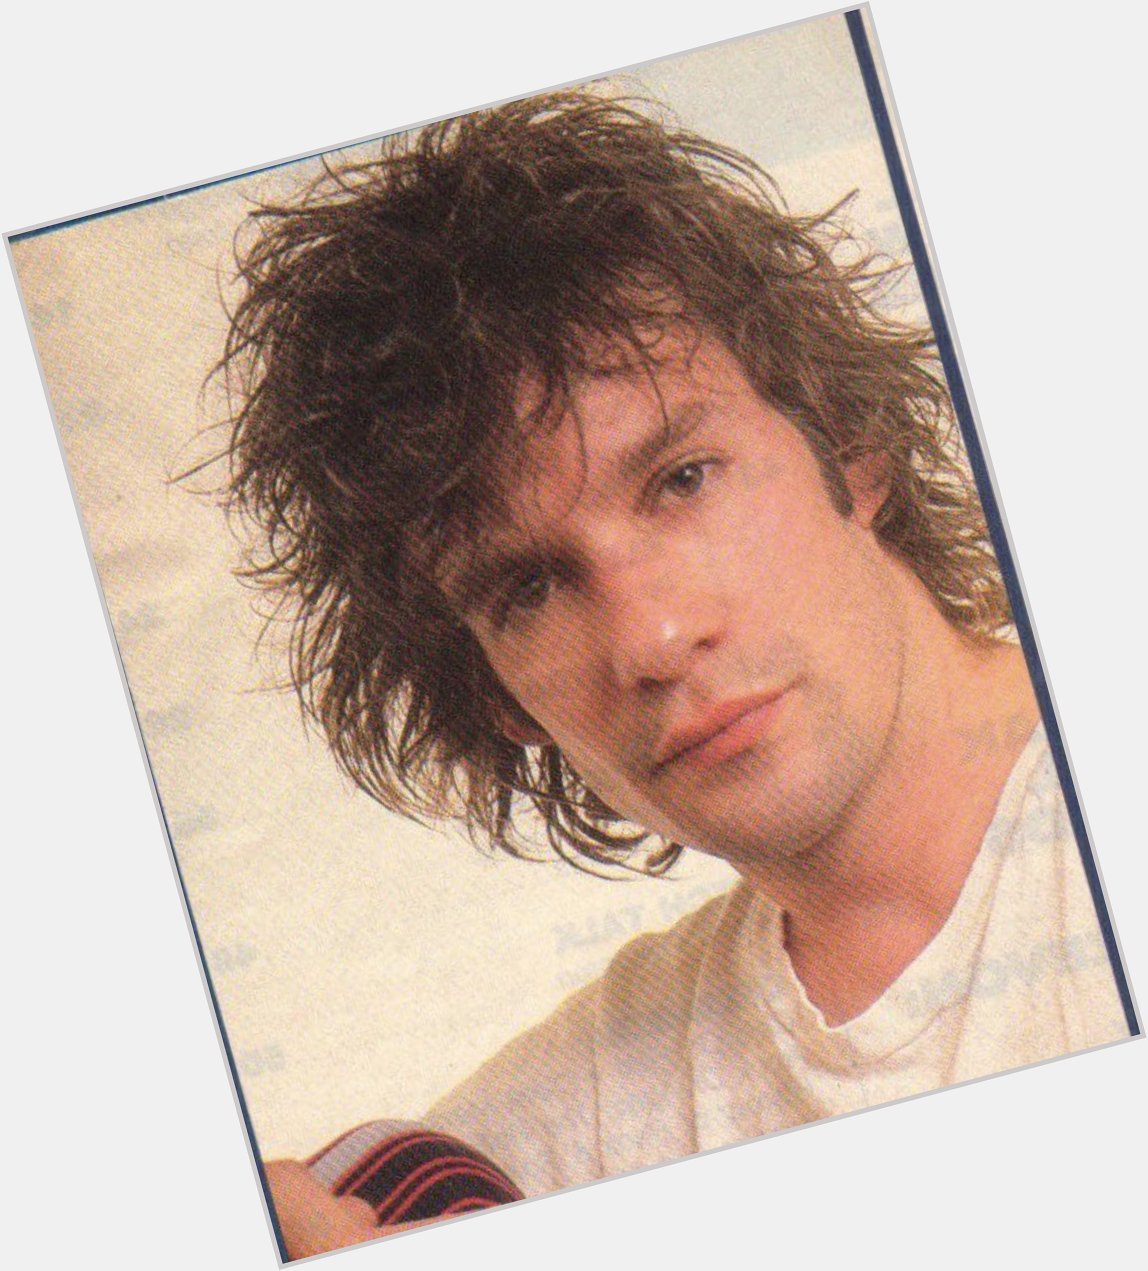 Happy 59th Birthday to Paul Westerberg. Hope to see you onstage soon 